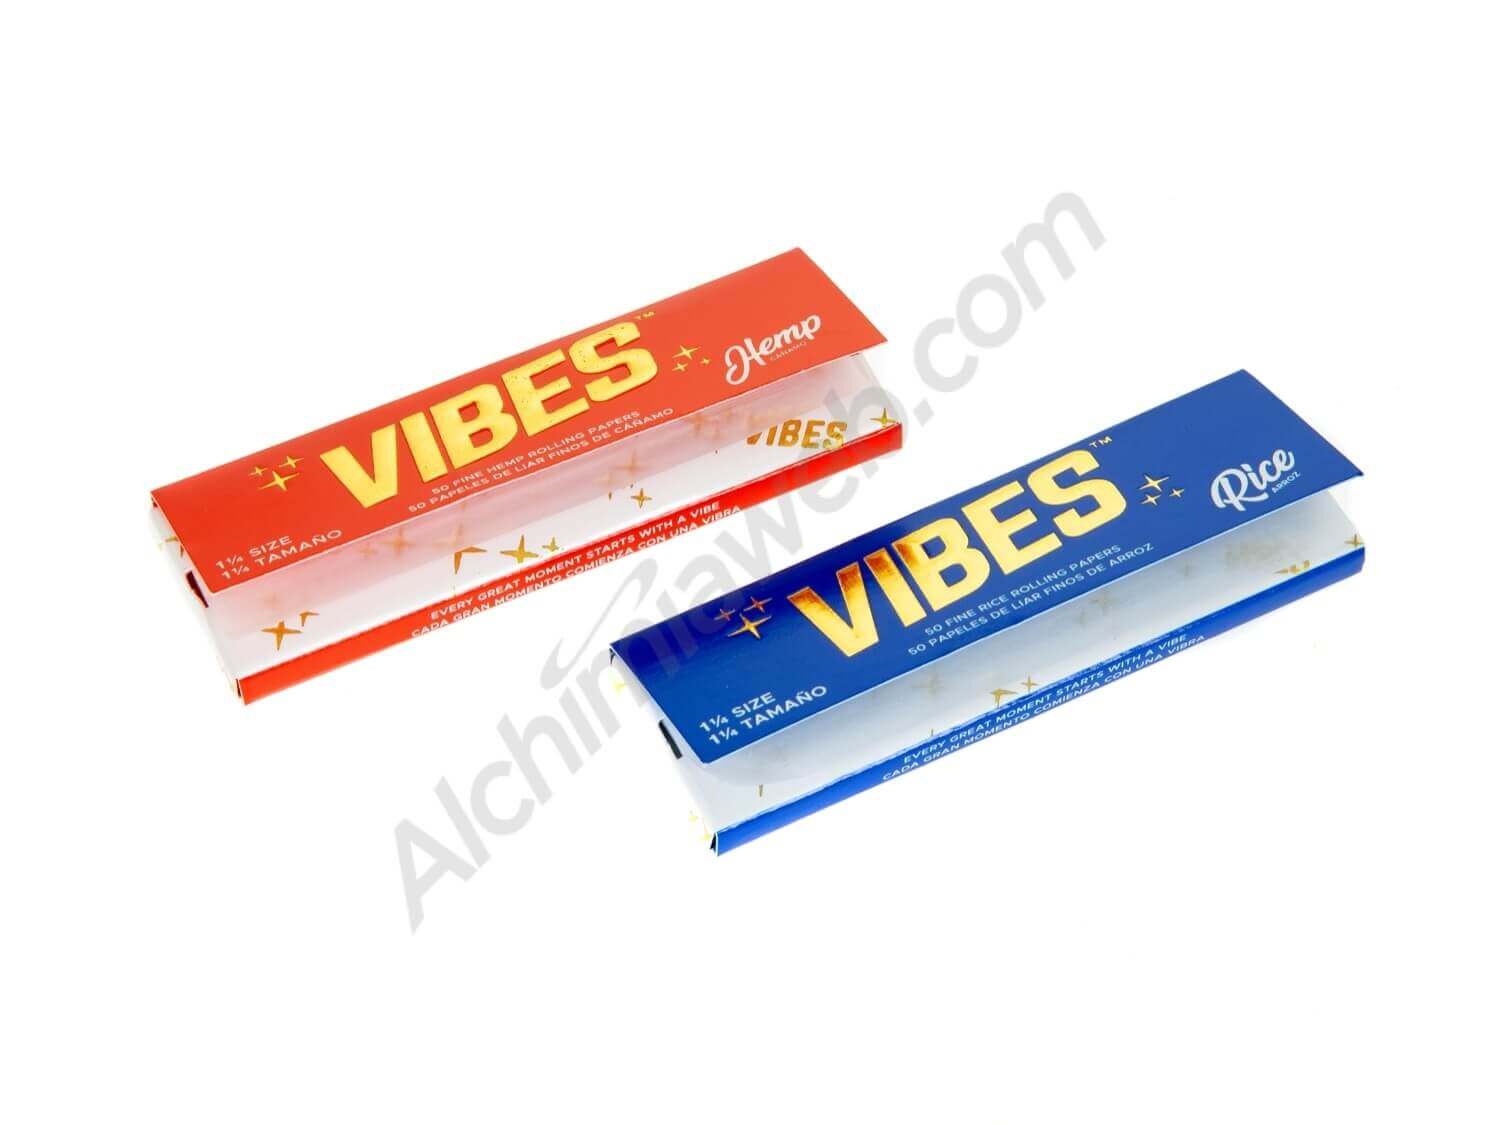 Sale of 1¼ Vibes rolling papers